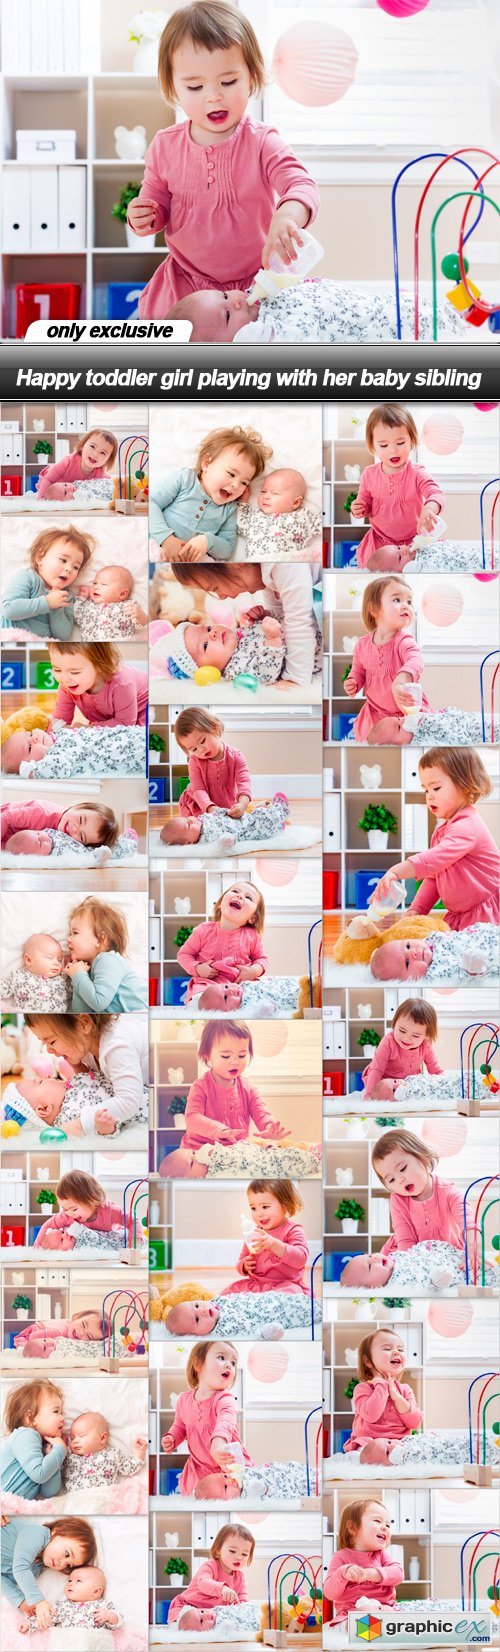 Happy toddler girl playing with her baby sibling - 25 UHQ JPEG